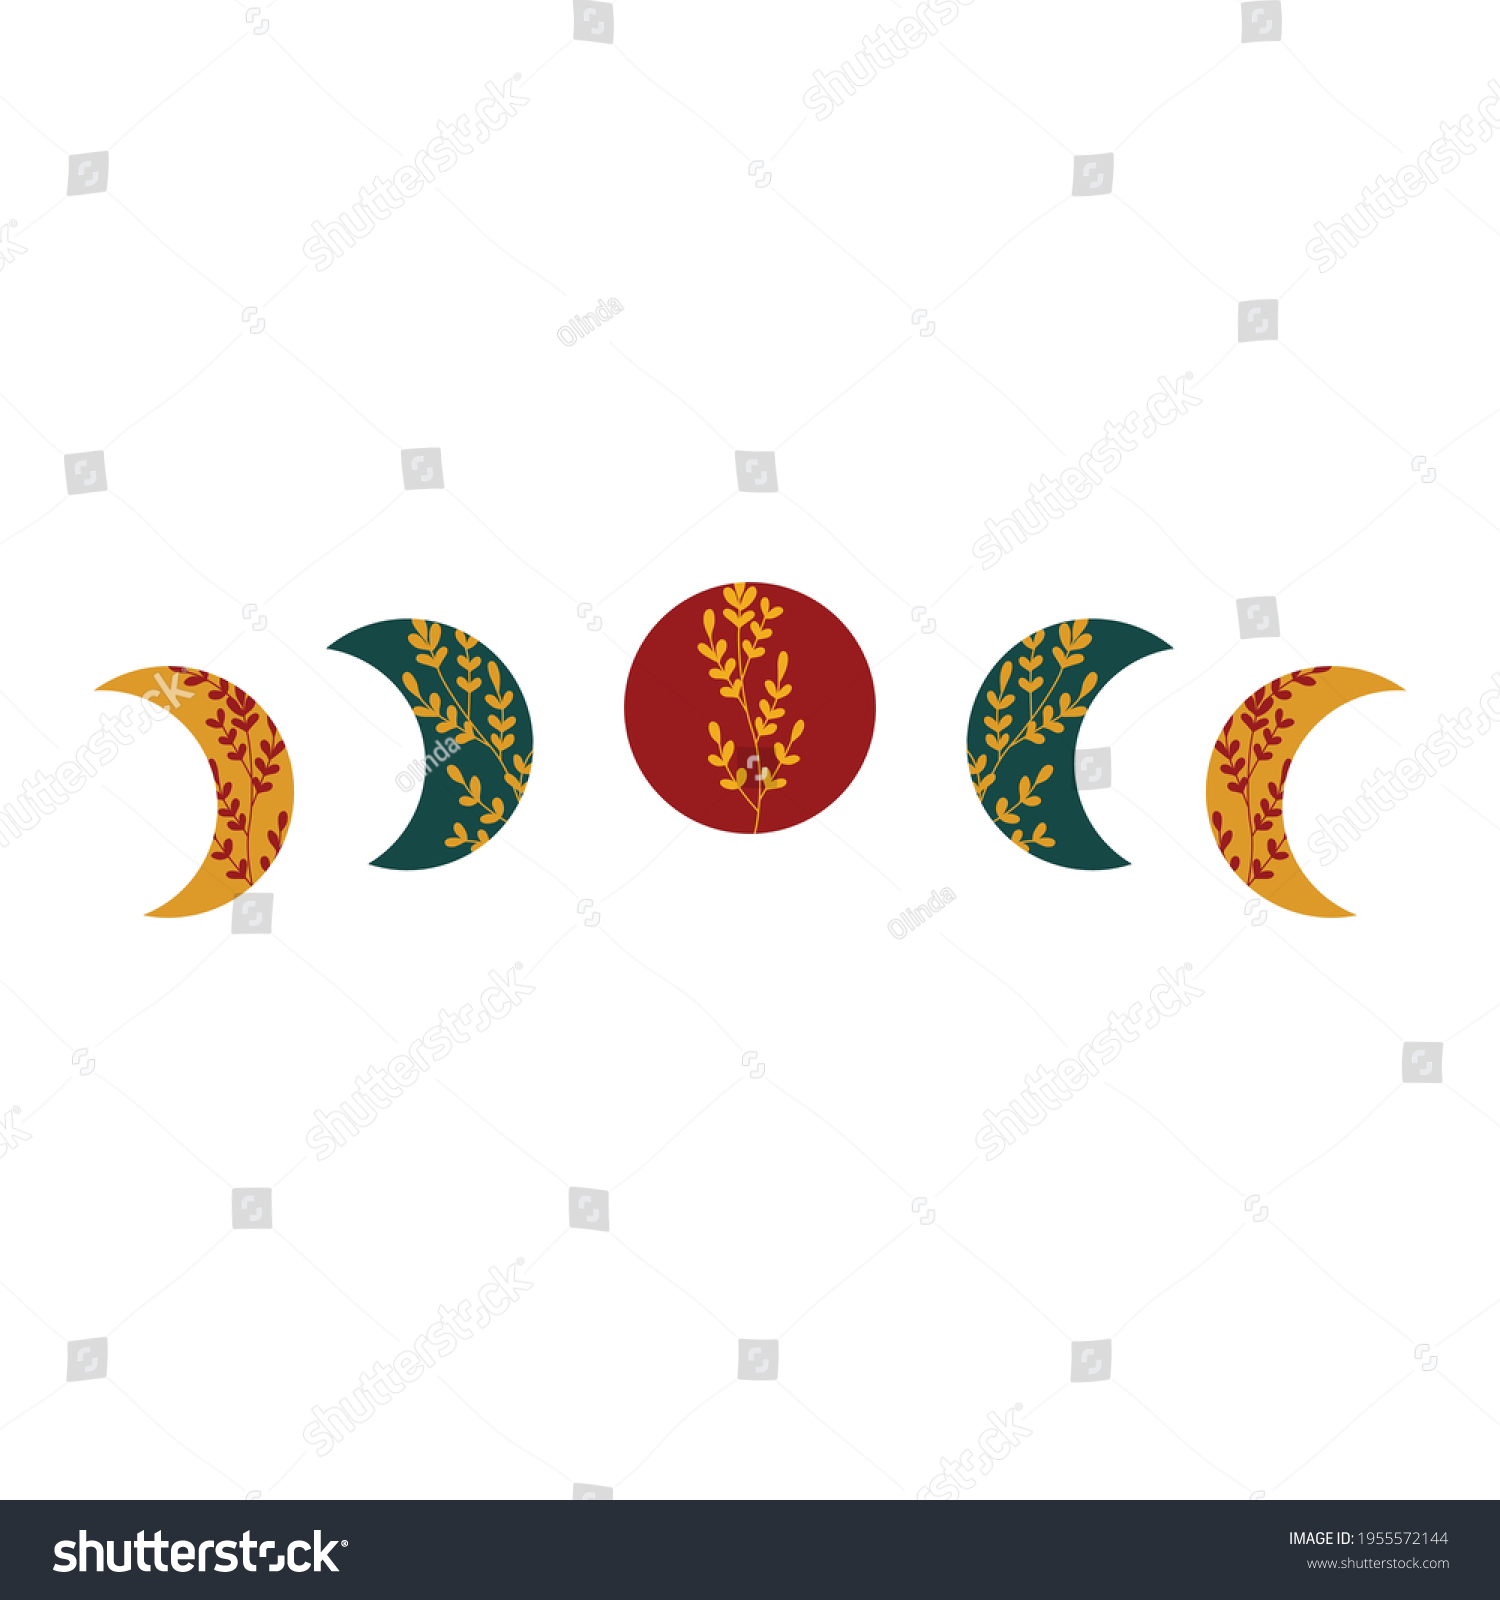 SVG of Moon phases with full and crescent moon in Boho colors and floral lace ornament. Islamic religious symbol Ramadan holiday. Design element for logos icons. Vector illustration svg